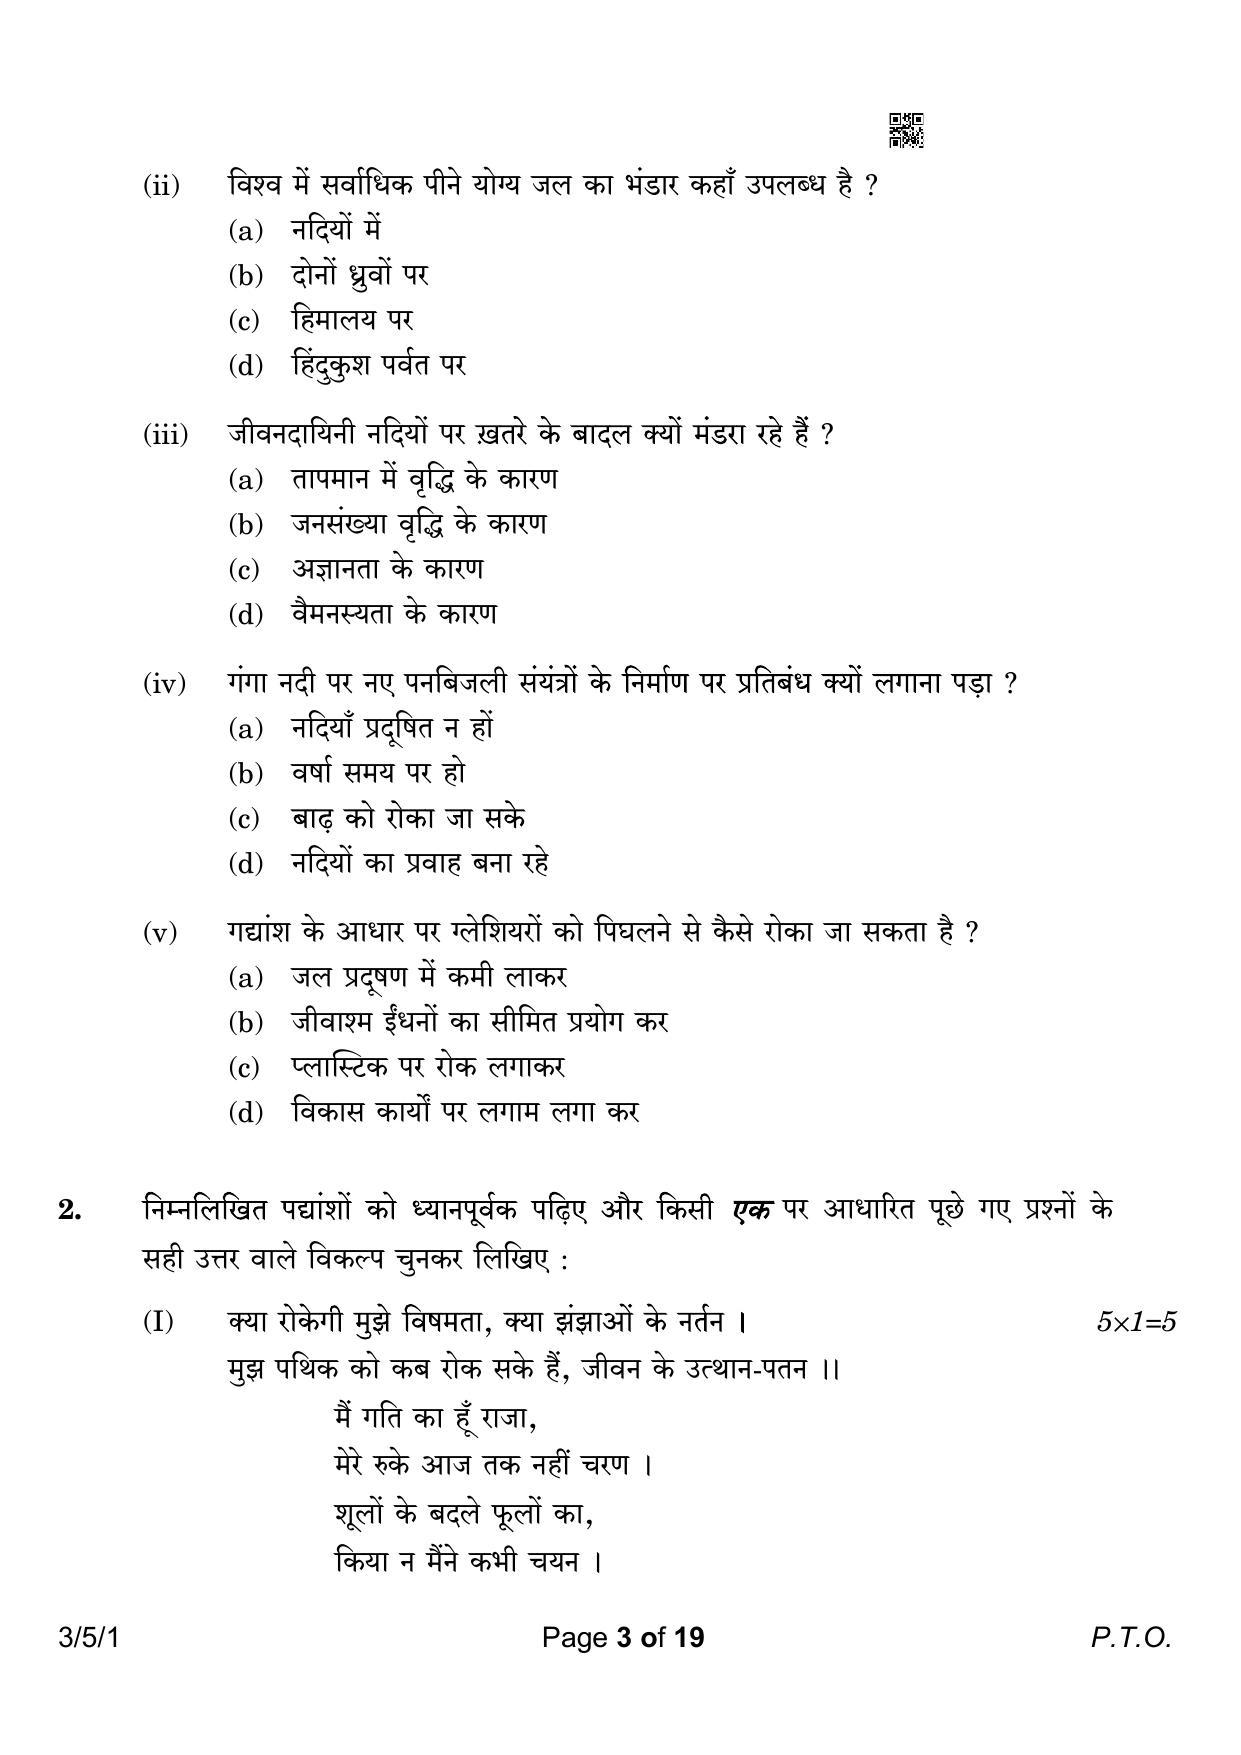 CBSE Class 10 3-5-1 Hindi A 2023 Question Paper - Page 3